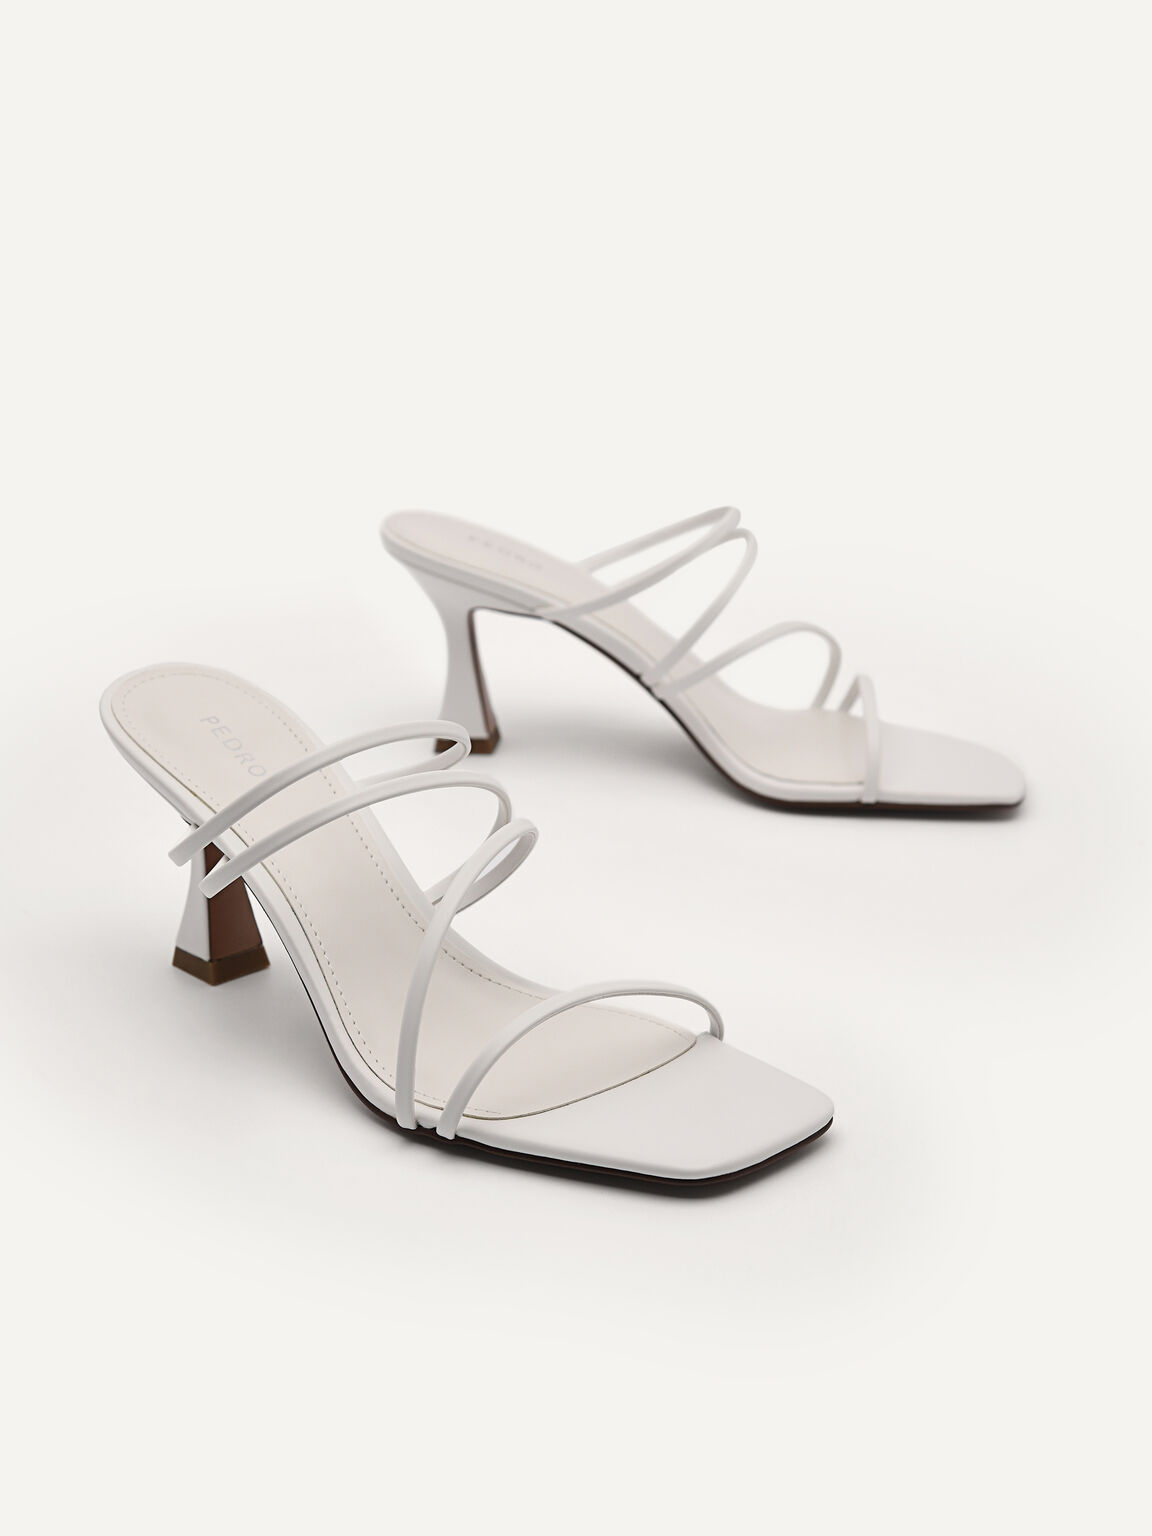 Strappy Heeled Sandals, White